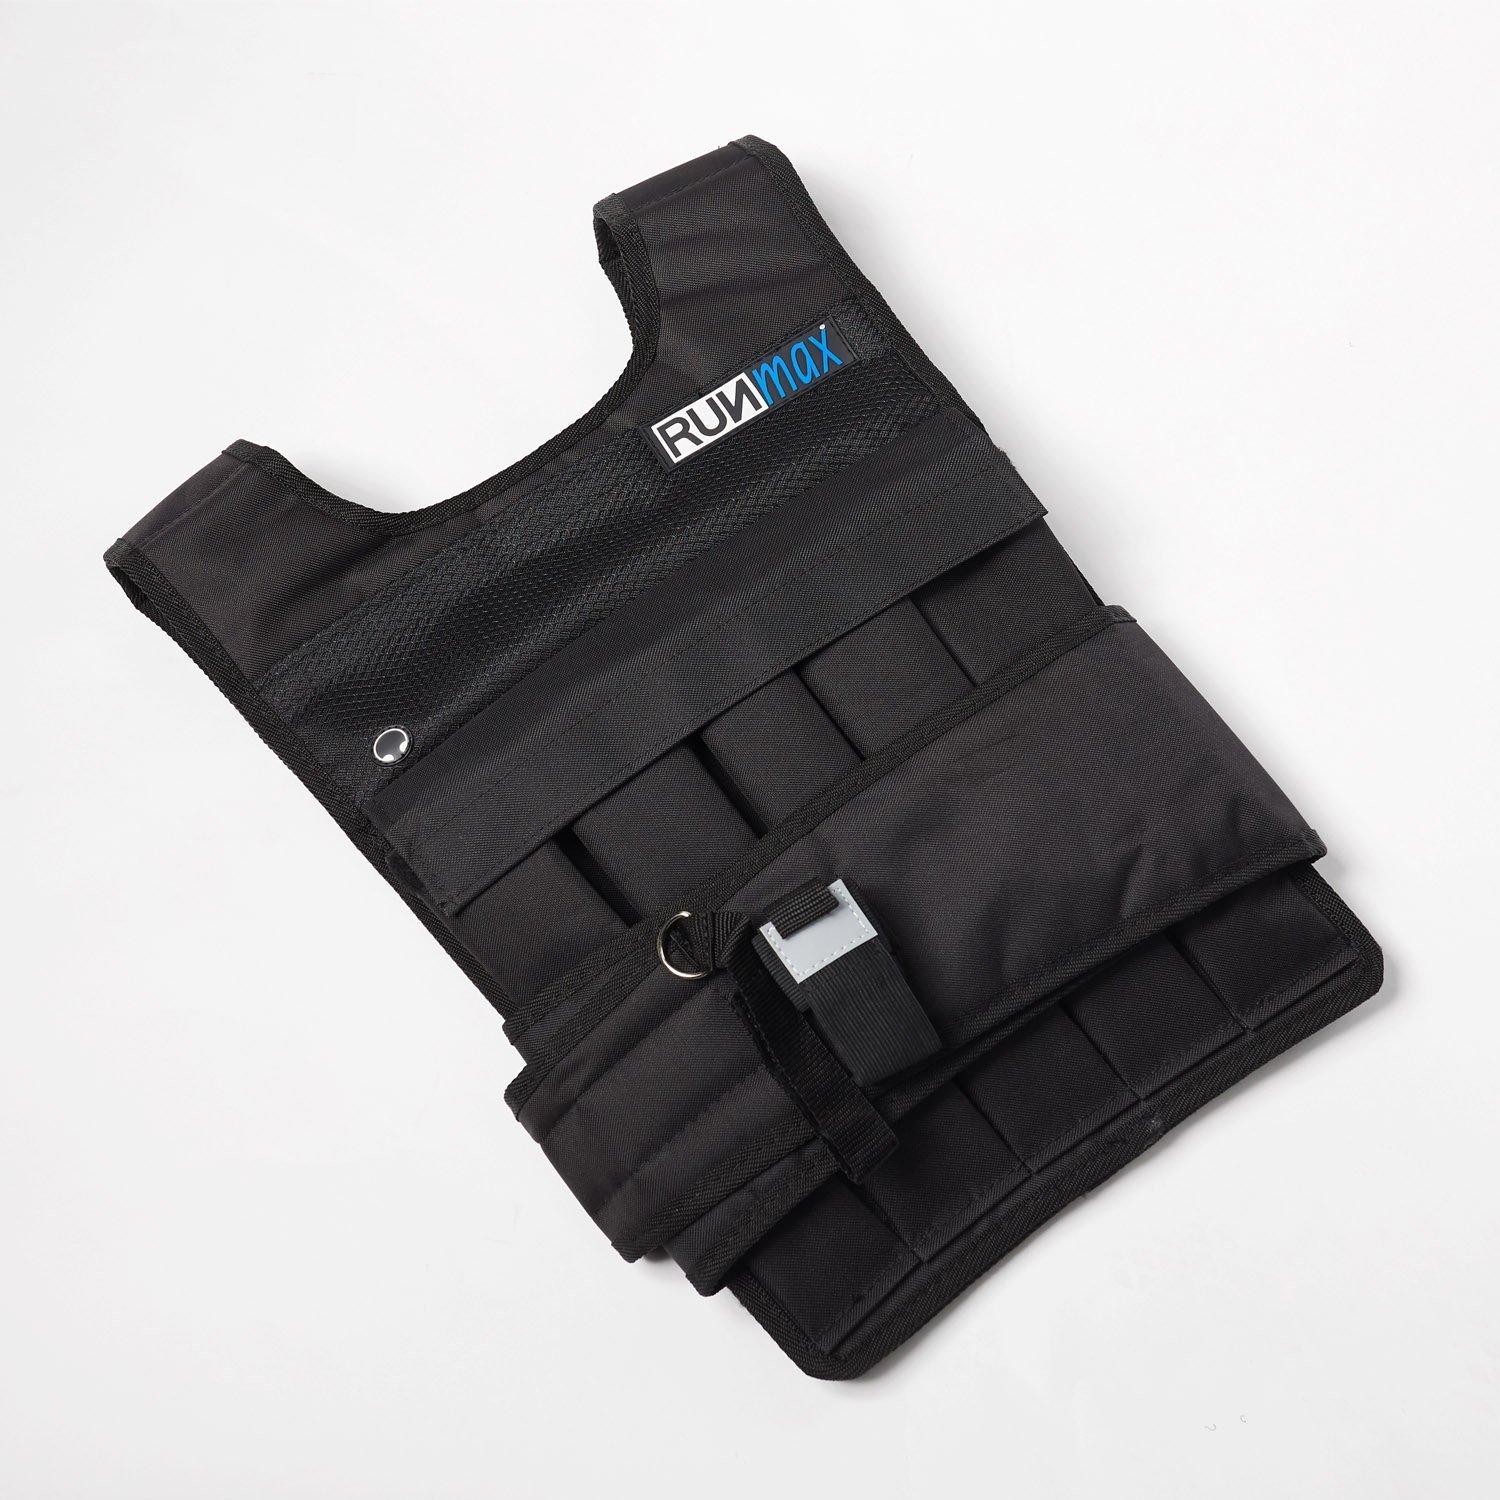 4 best weighted vests for running and crossfit that will change the way U train 2